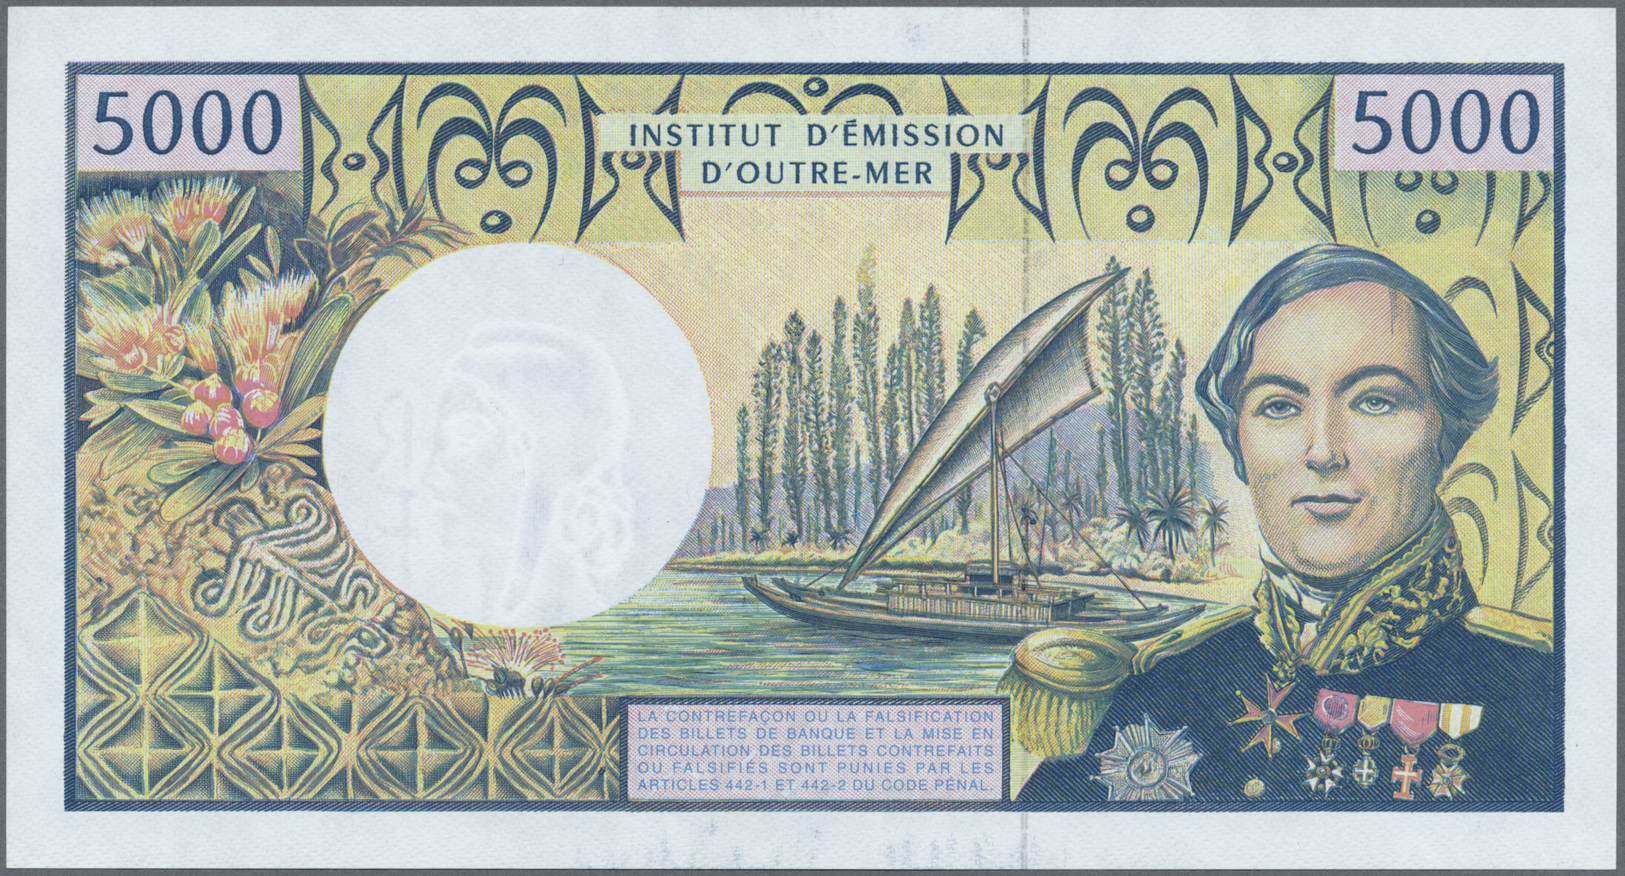 00859 French Pacific Territories / Franz. Geb. Im Pazifik: 5000 Francs ND P. 3 In Condition: UNC. - French Pacific Territories (1992-...)